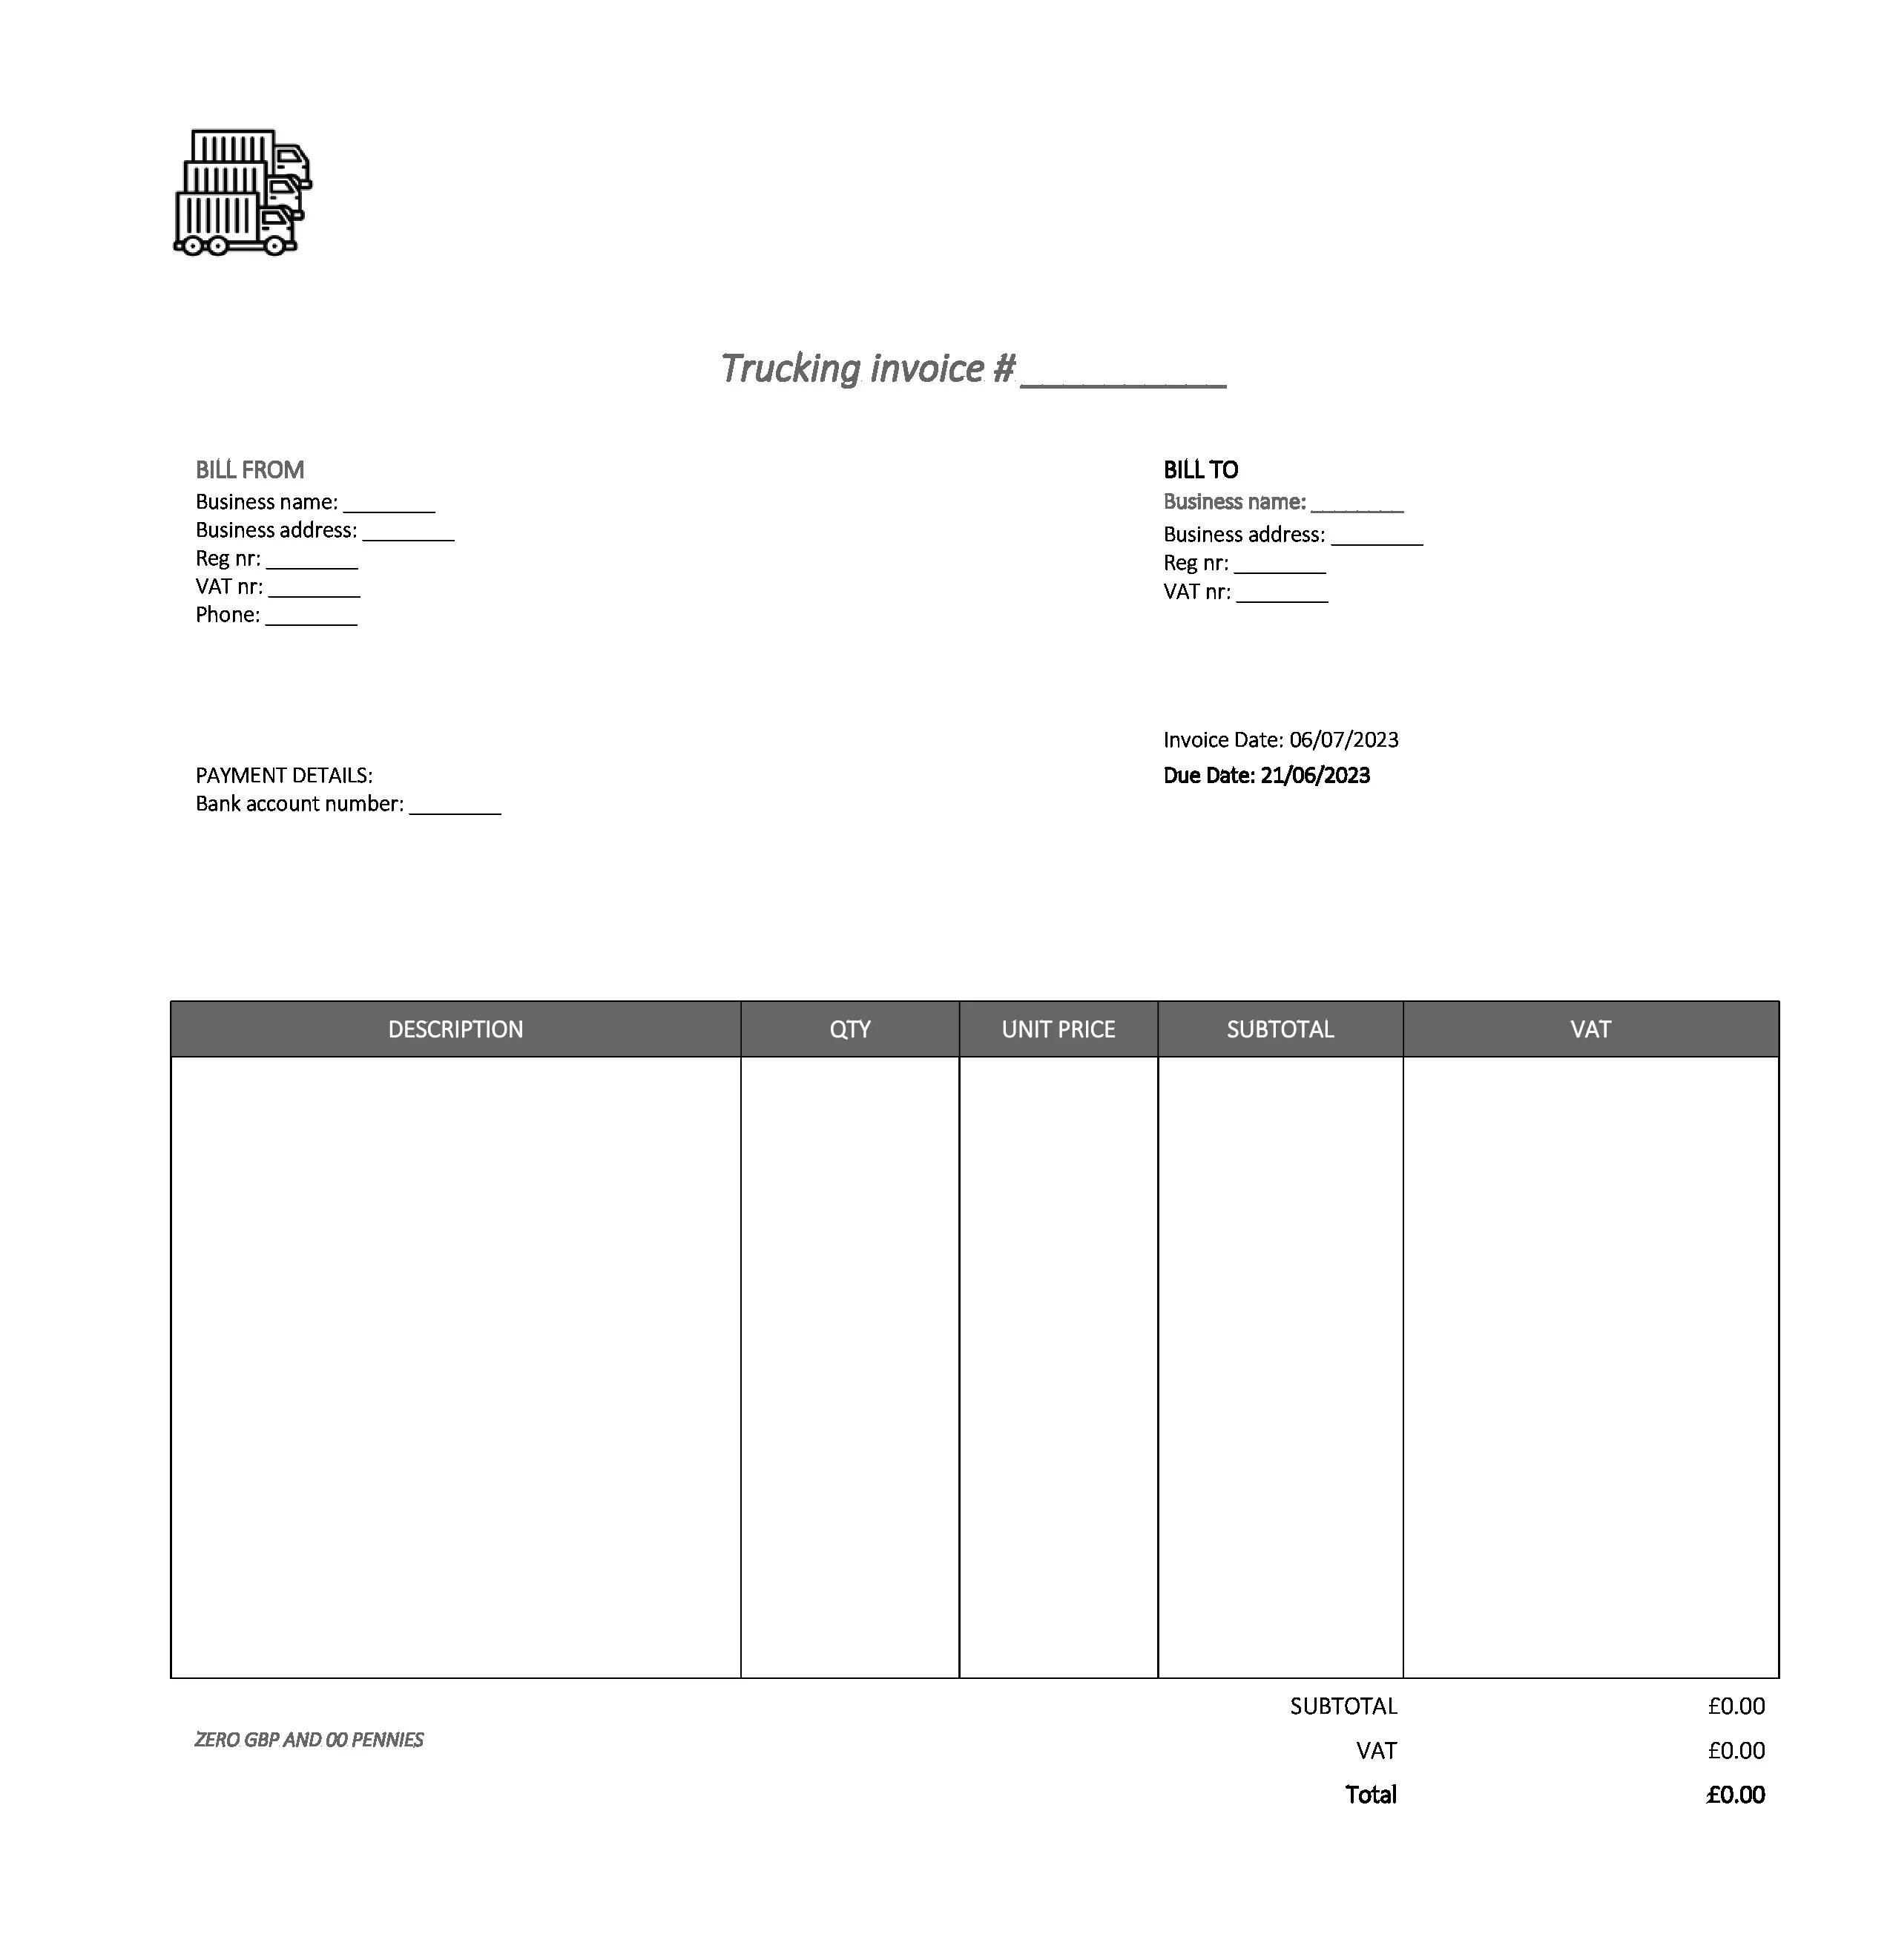 fancy trucking invoice template UK Excel / Google sheets